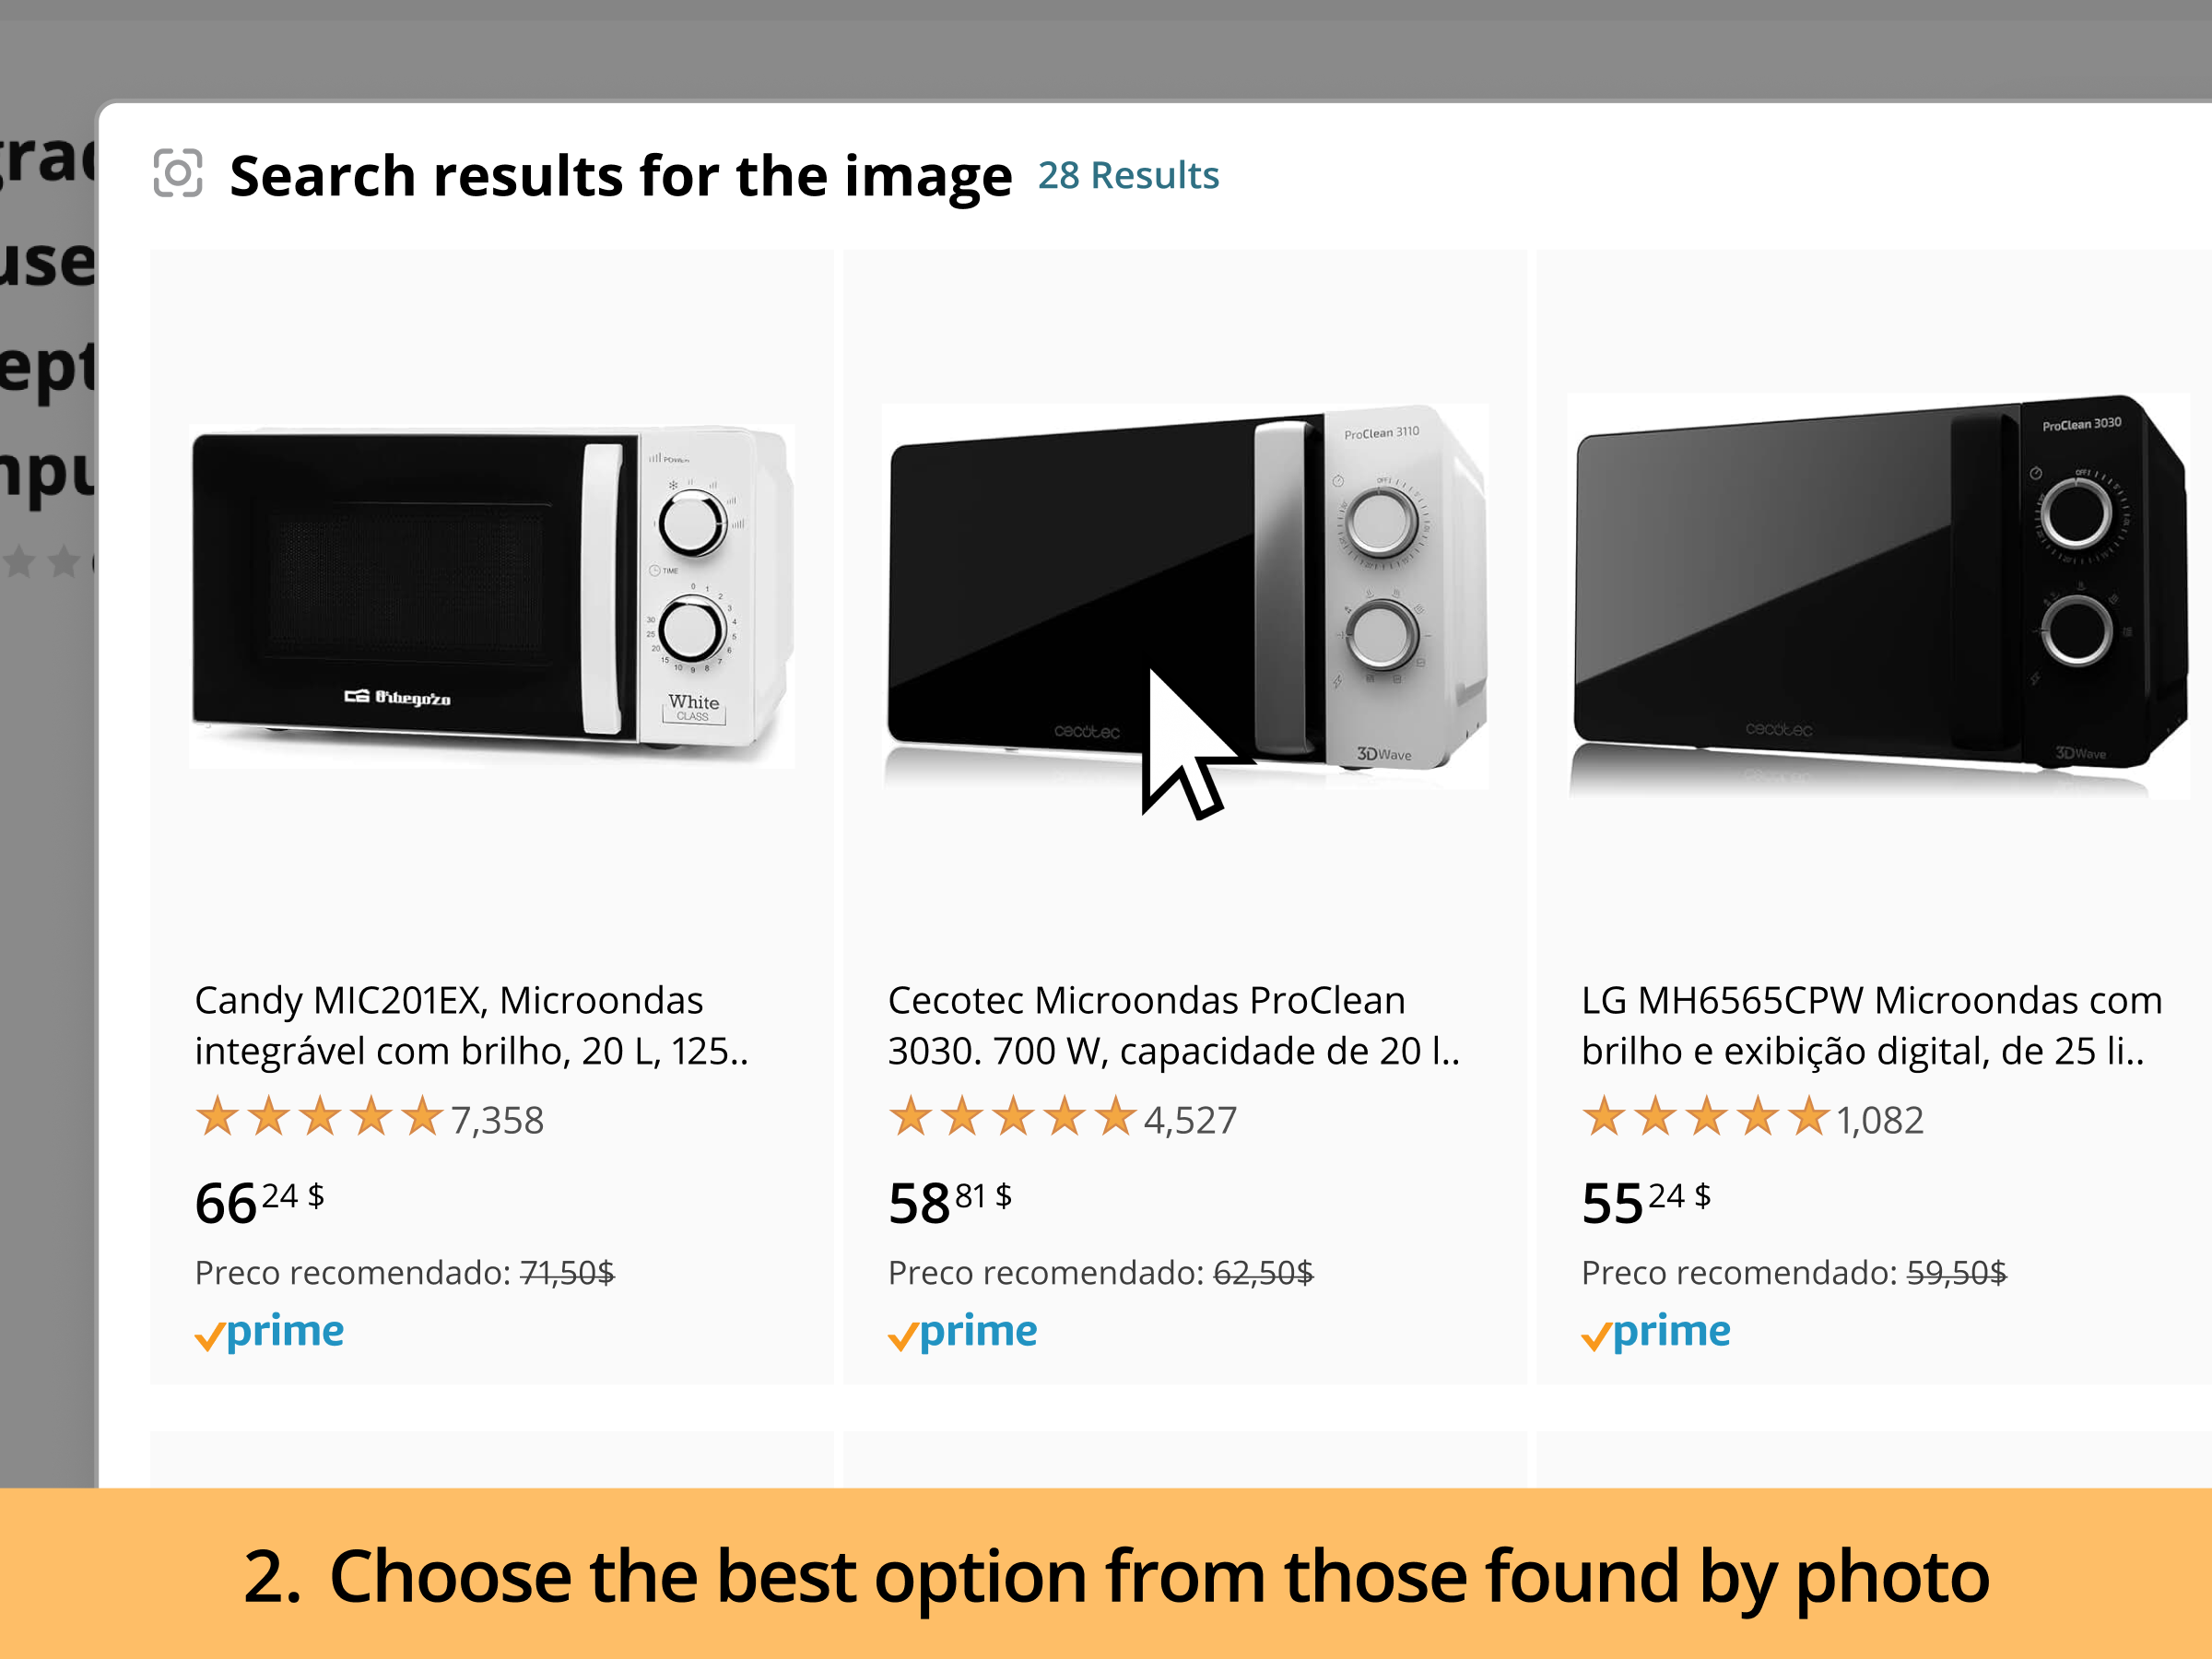 Search by image on Amazon